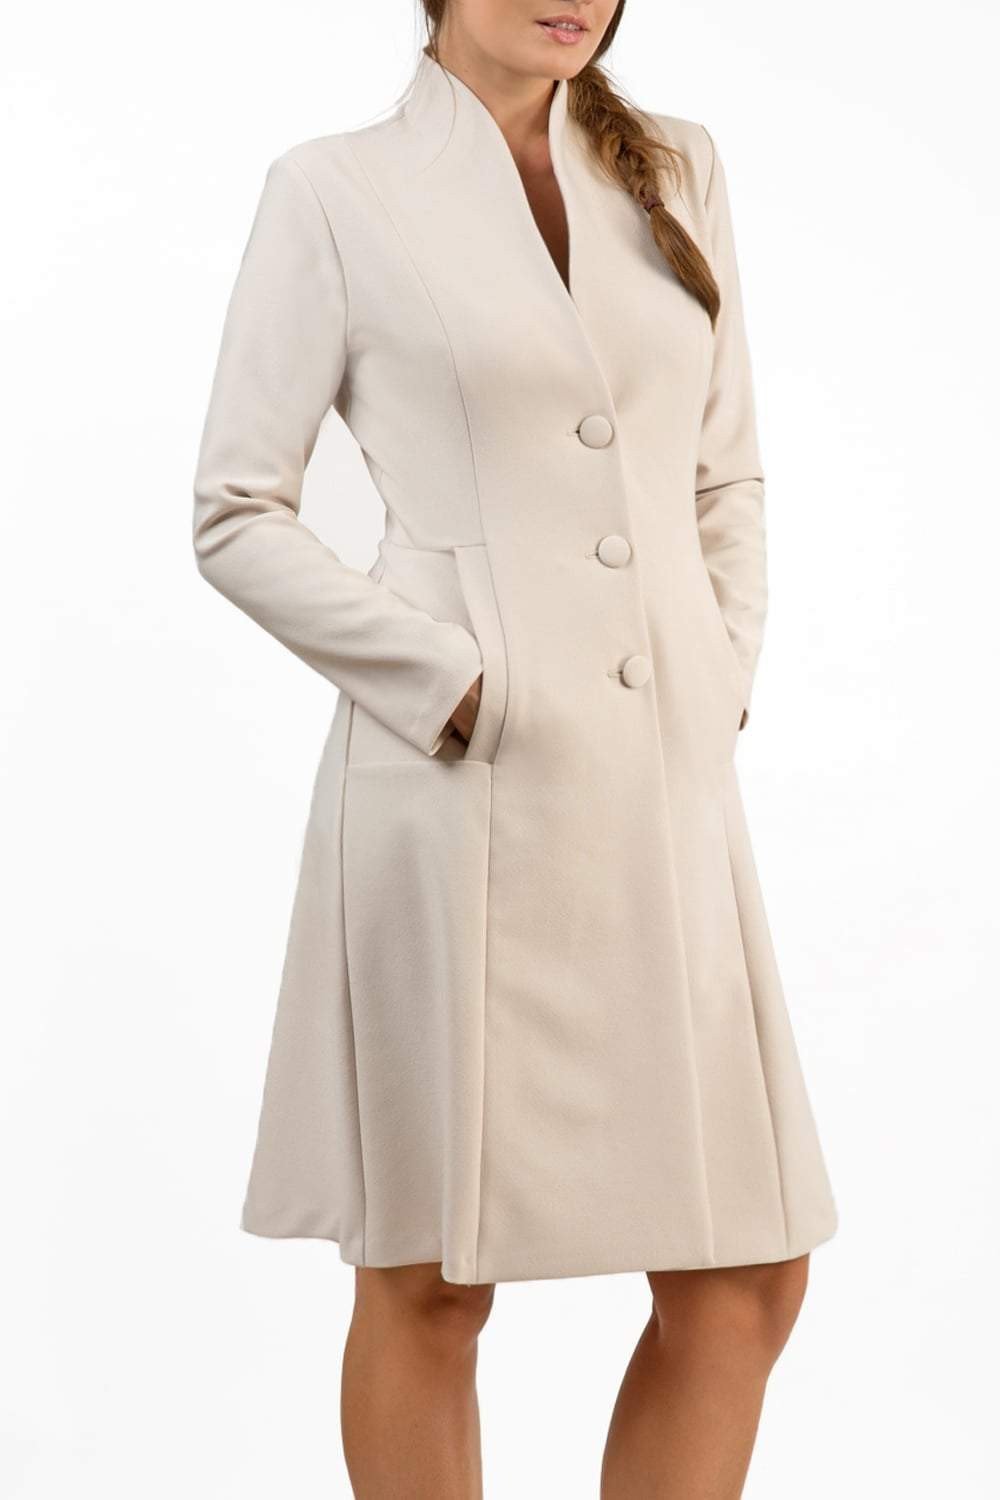 brunette model wearing diva catwalk couture fine raquella coat with buttons across the front and long sleeves with high neck and pockets in sandy cream colour front